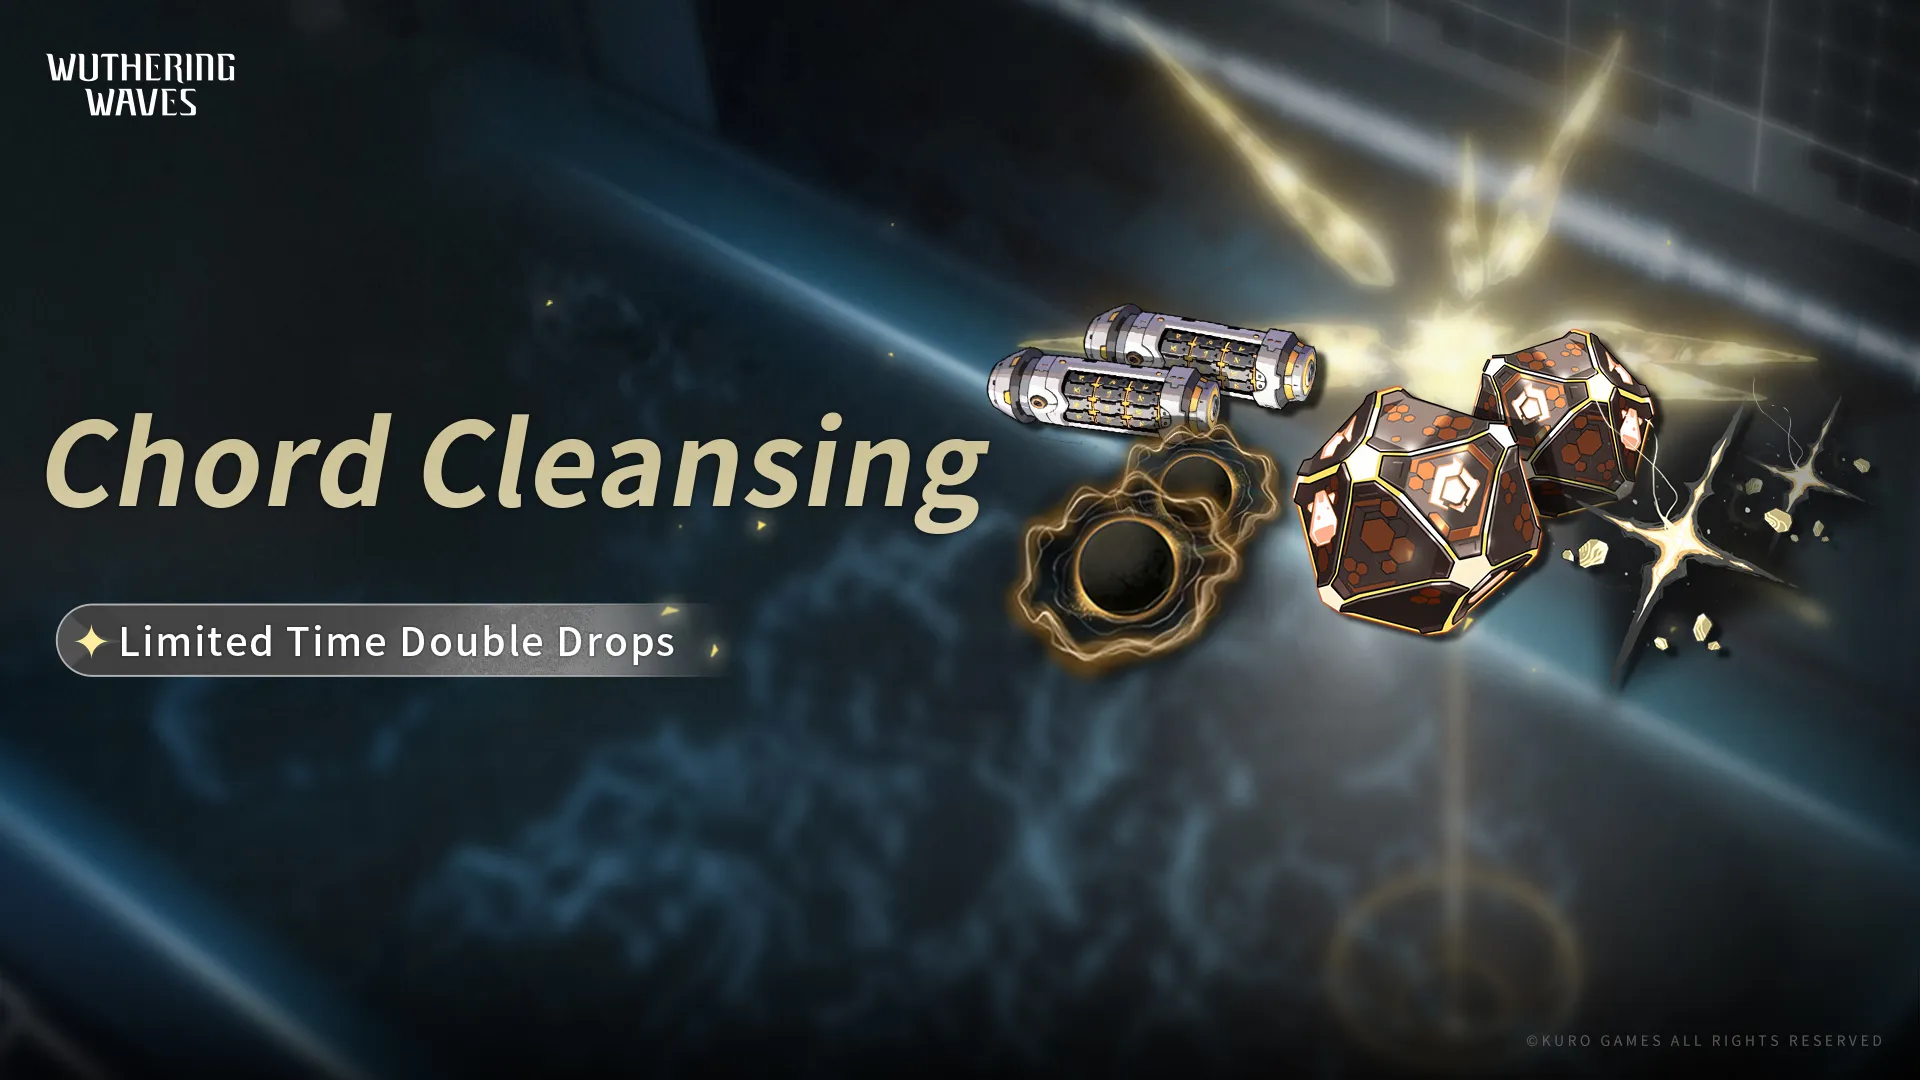 Wuthering Waves: Chord Cleansing Event Full Guide